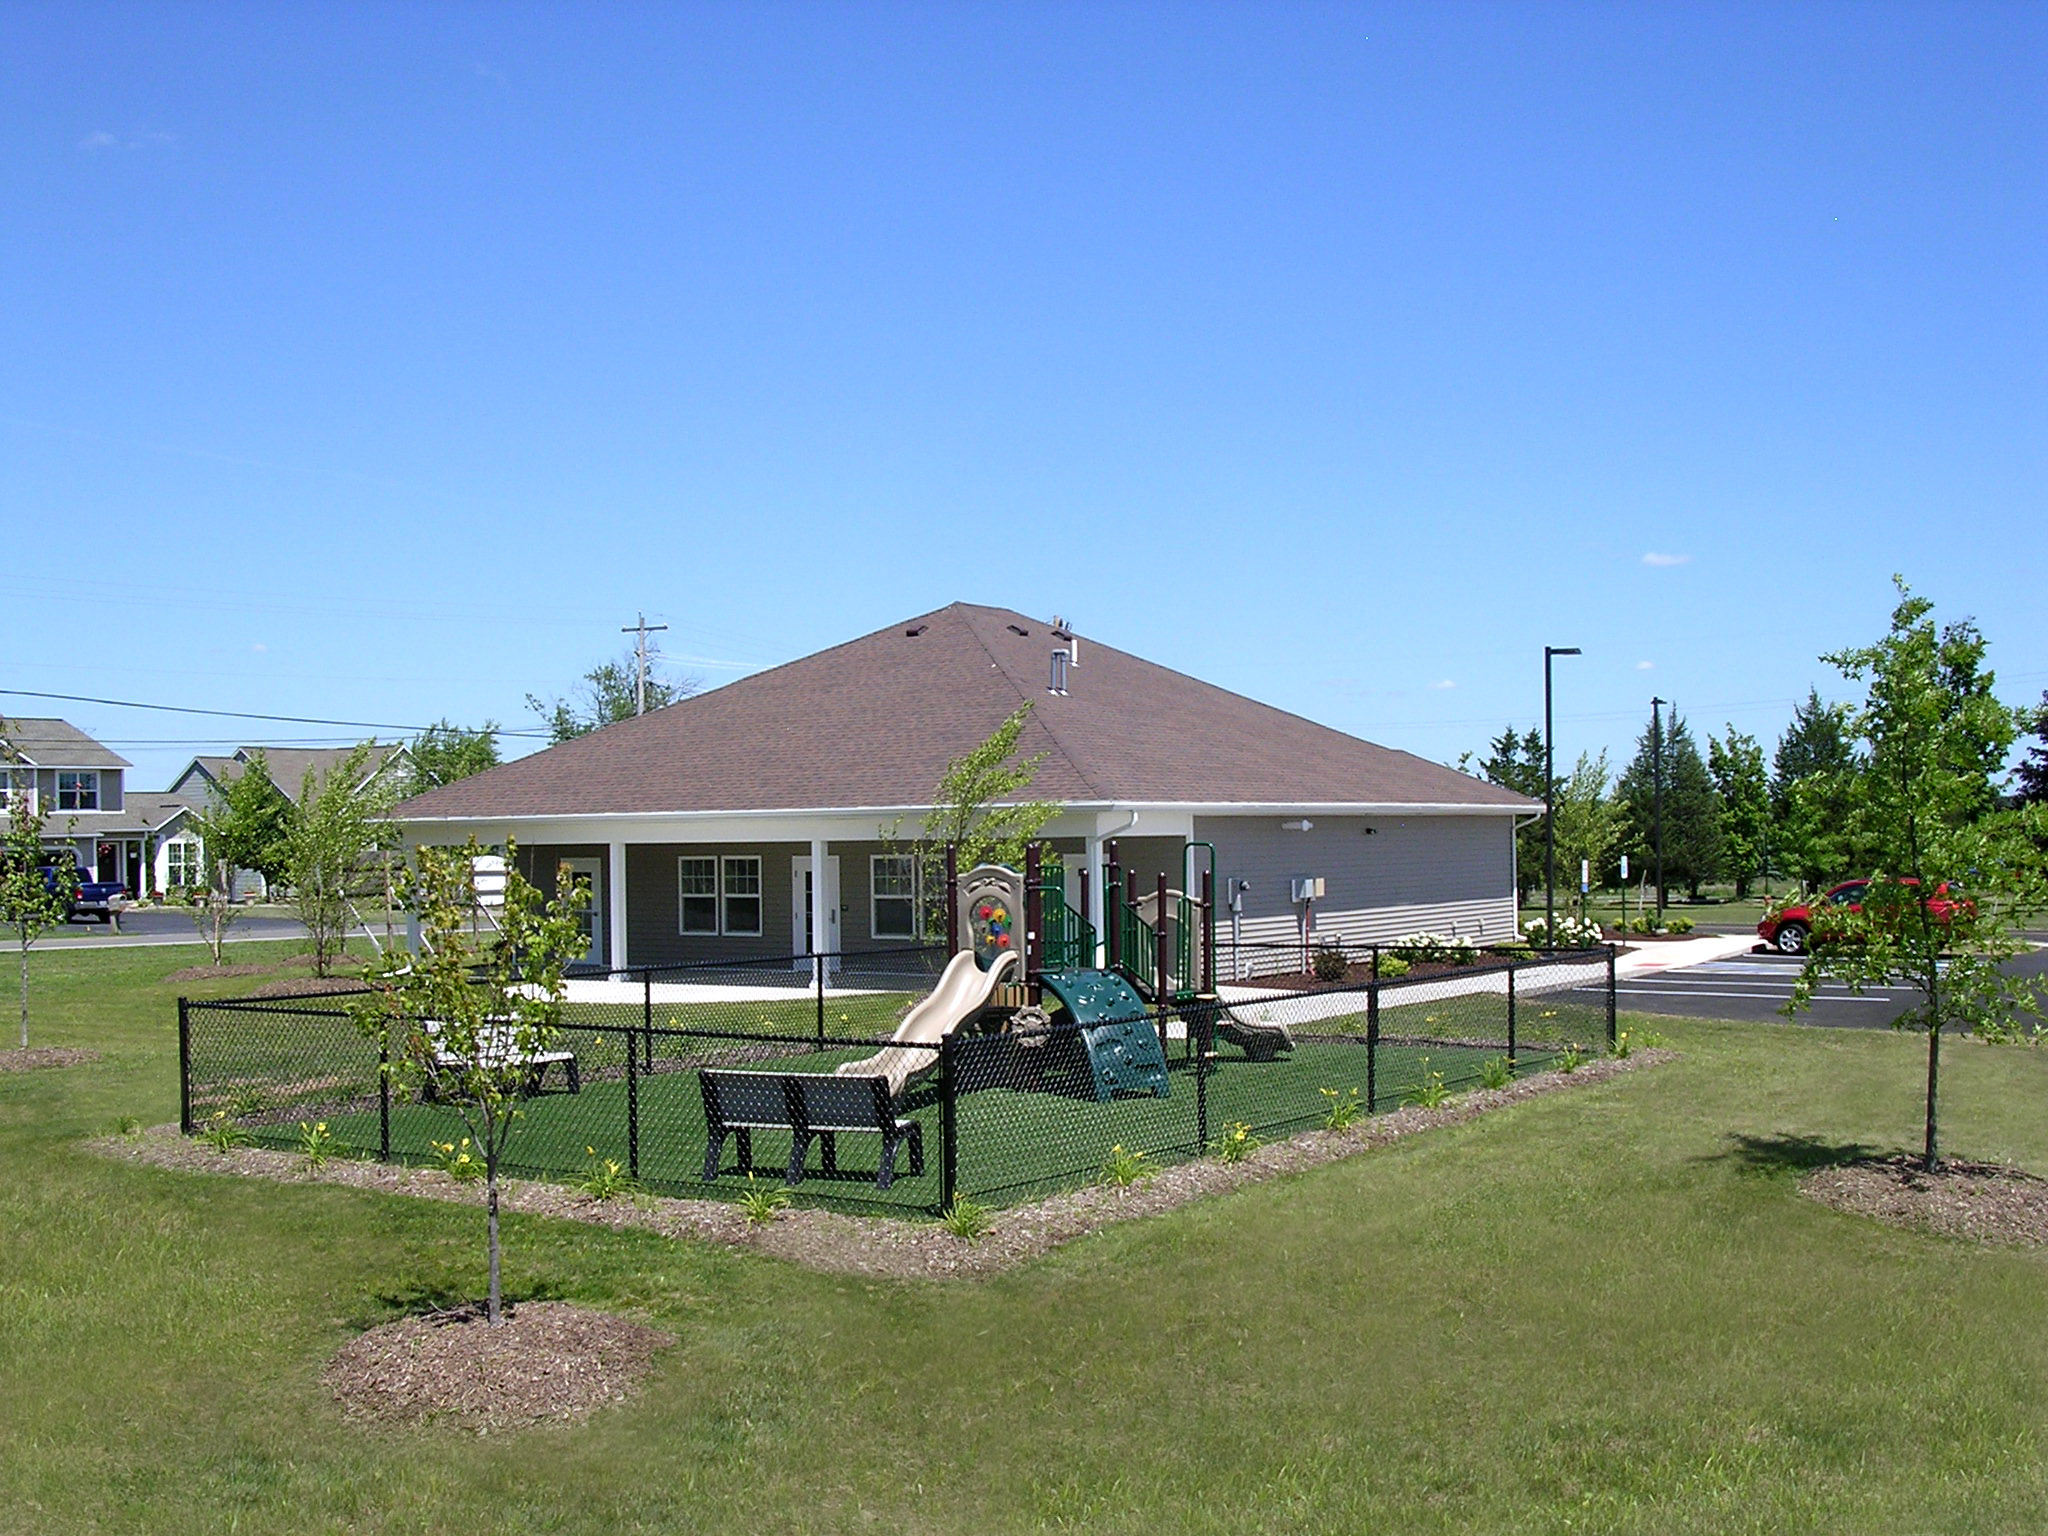 property management company client list syracuse ny playground image of island hollow townhomes